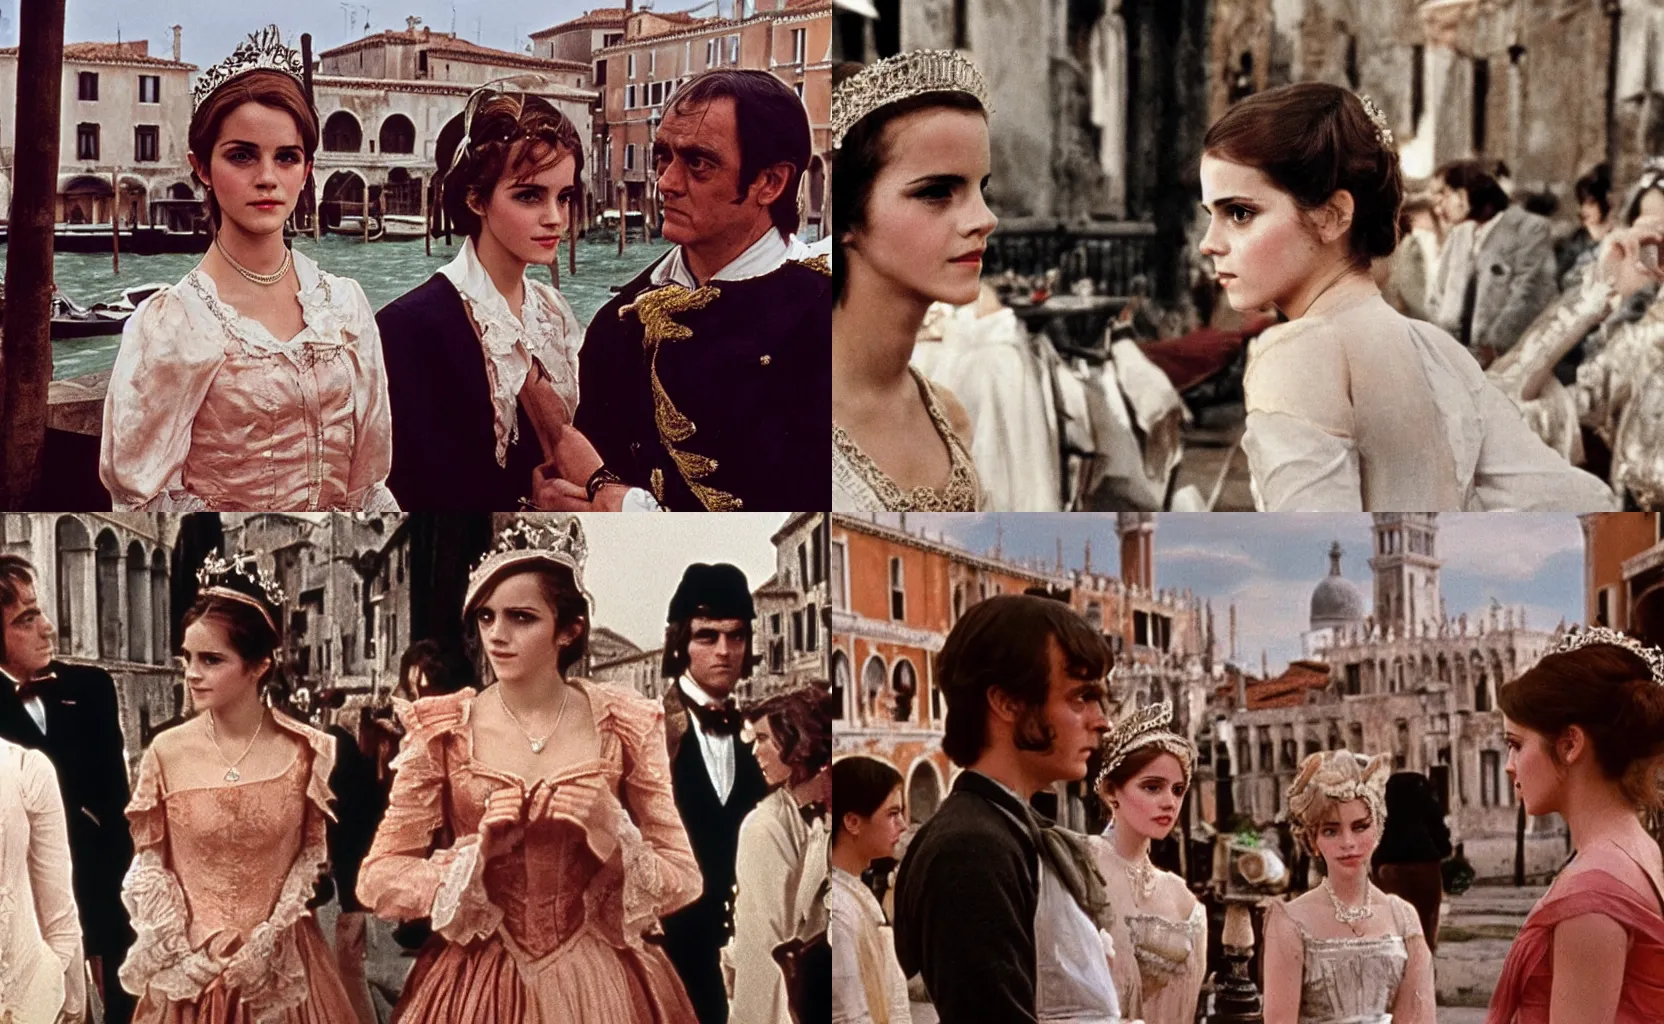 Prompt: scene of pulciana ( 1 9 7 6 ) a film of luchino visconti with a close up emma watson as a duchess. venice and a cafe in the background. technicolor, flamboyant.